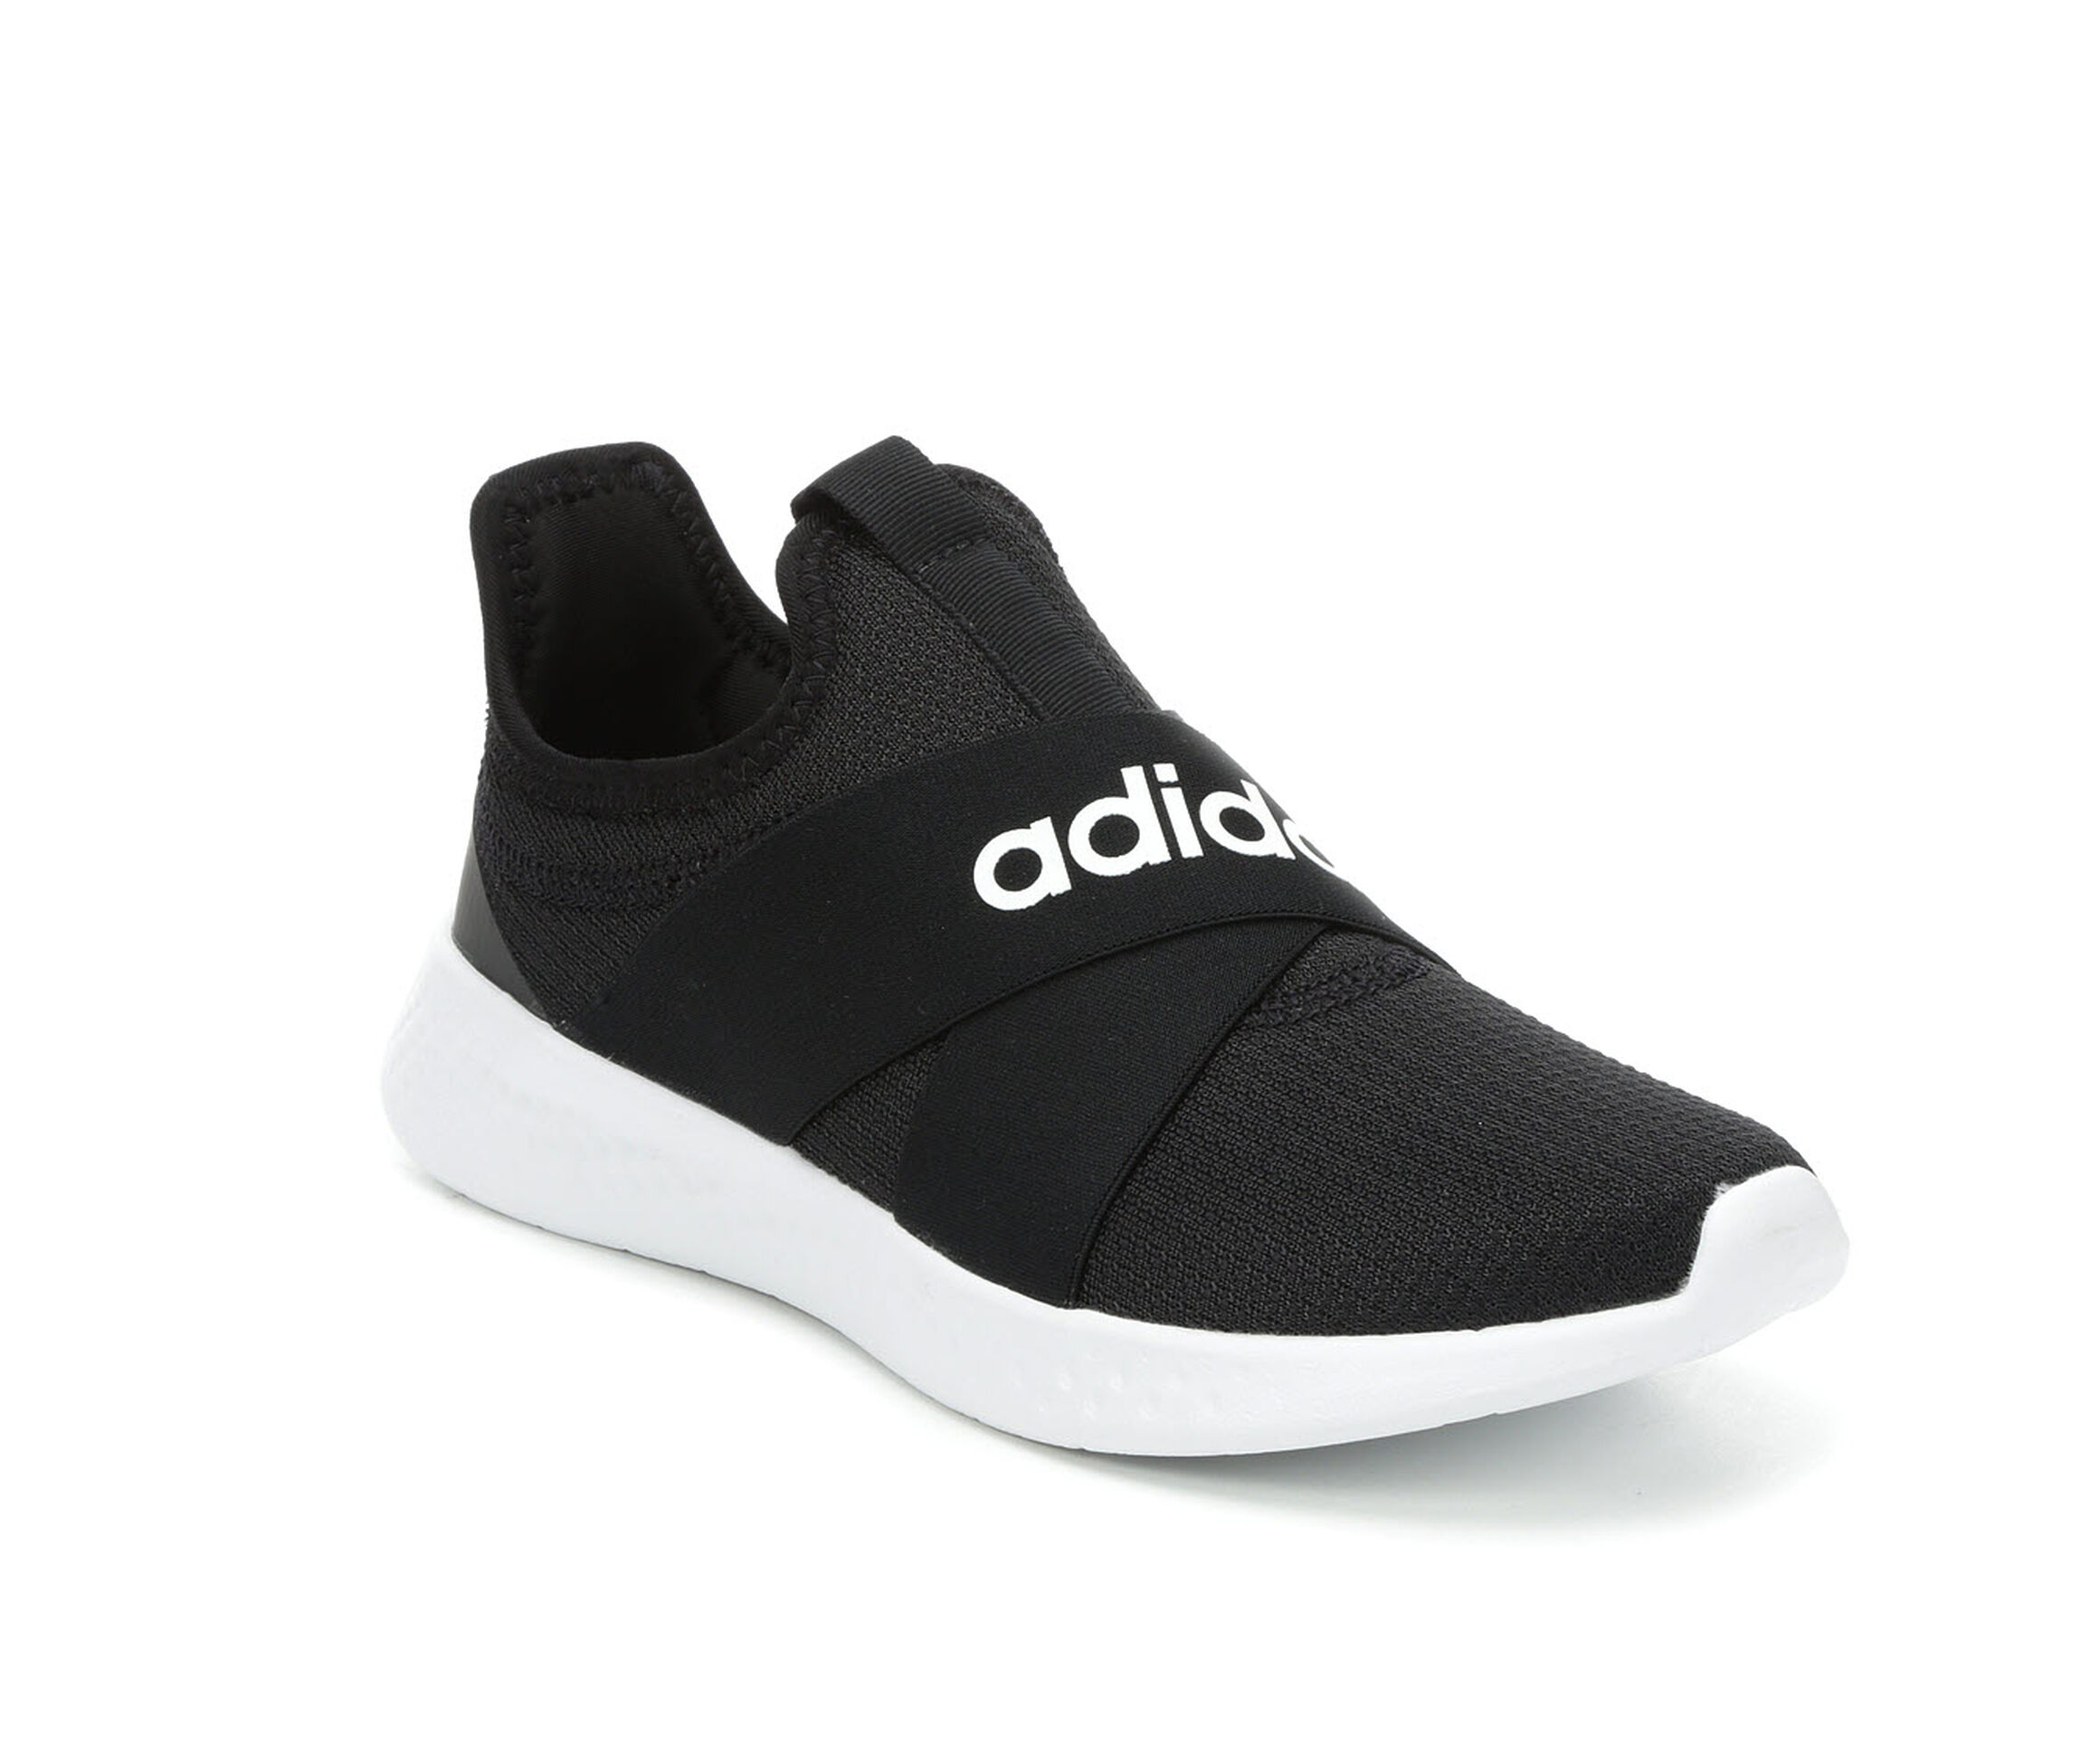 Adidas & Accessories | Shoe Carnival